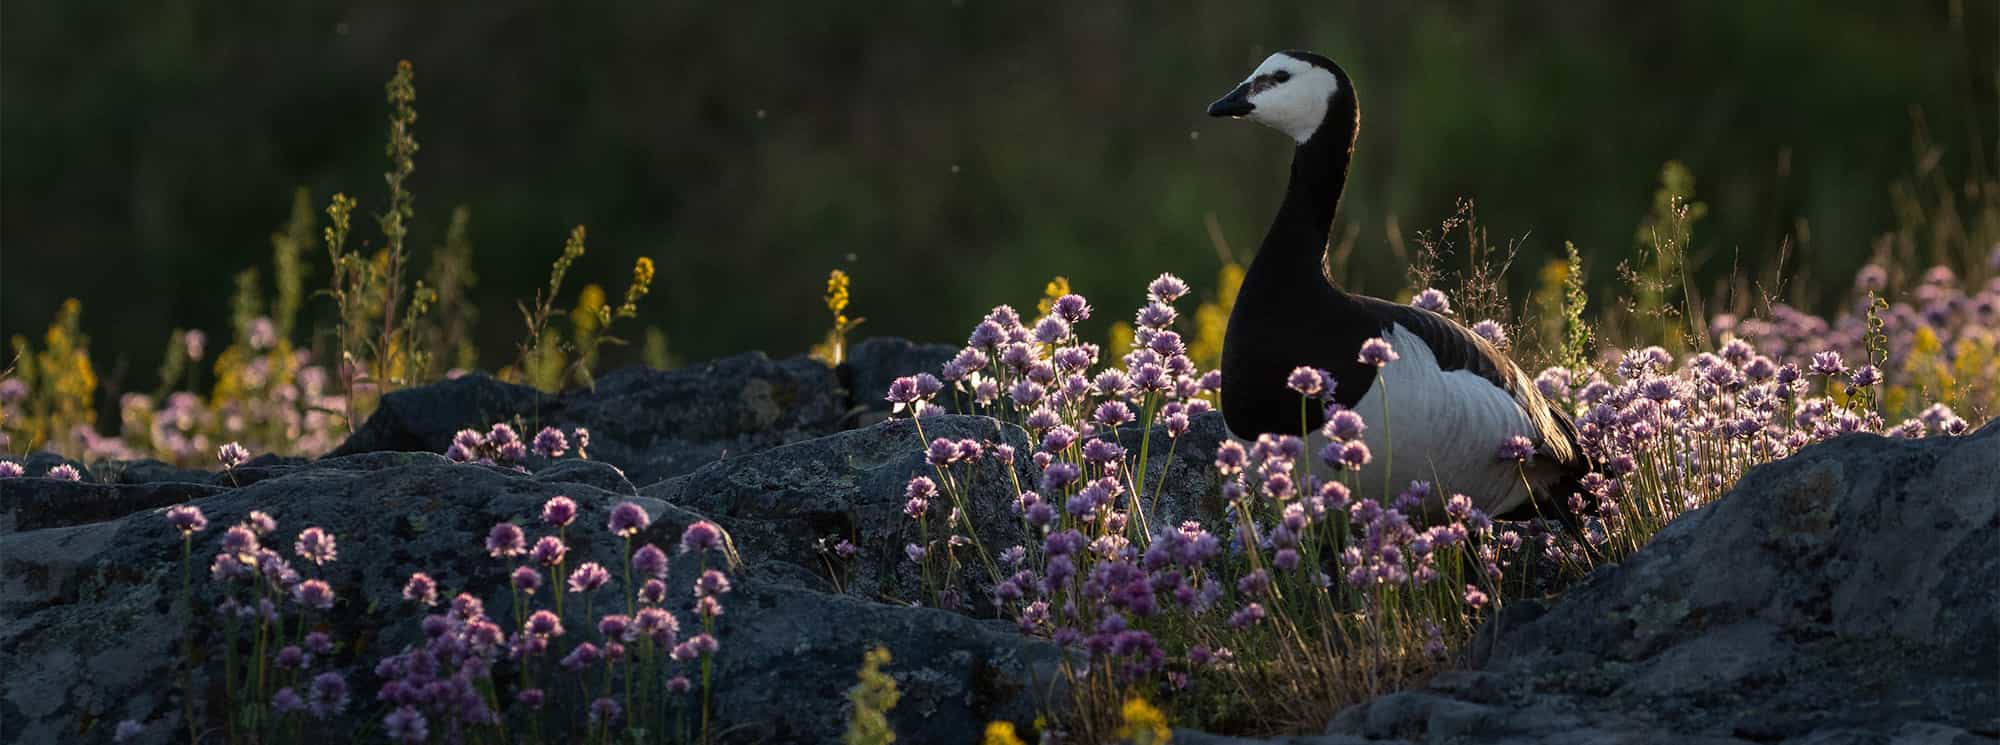 A Barnacle goose among purple flowers, in Suomenlinna